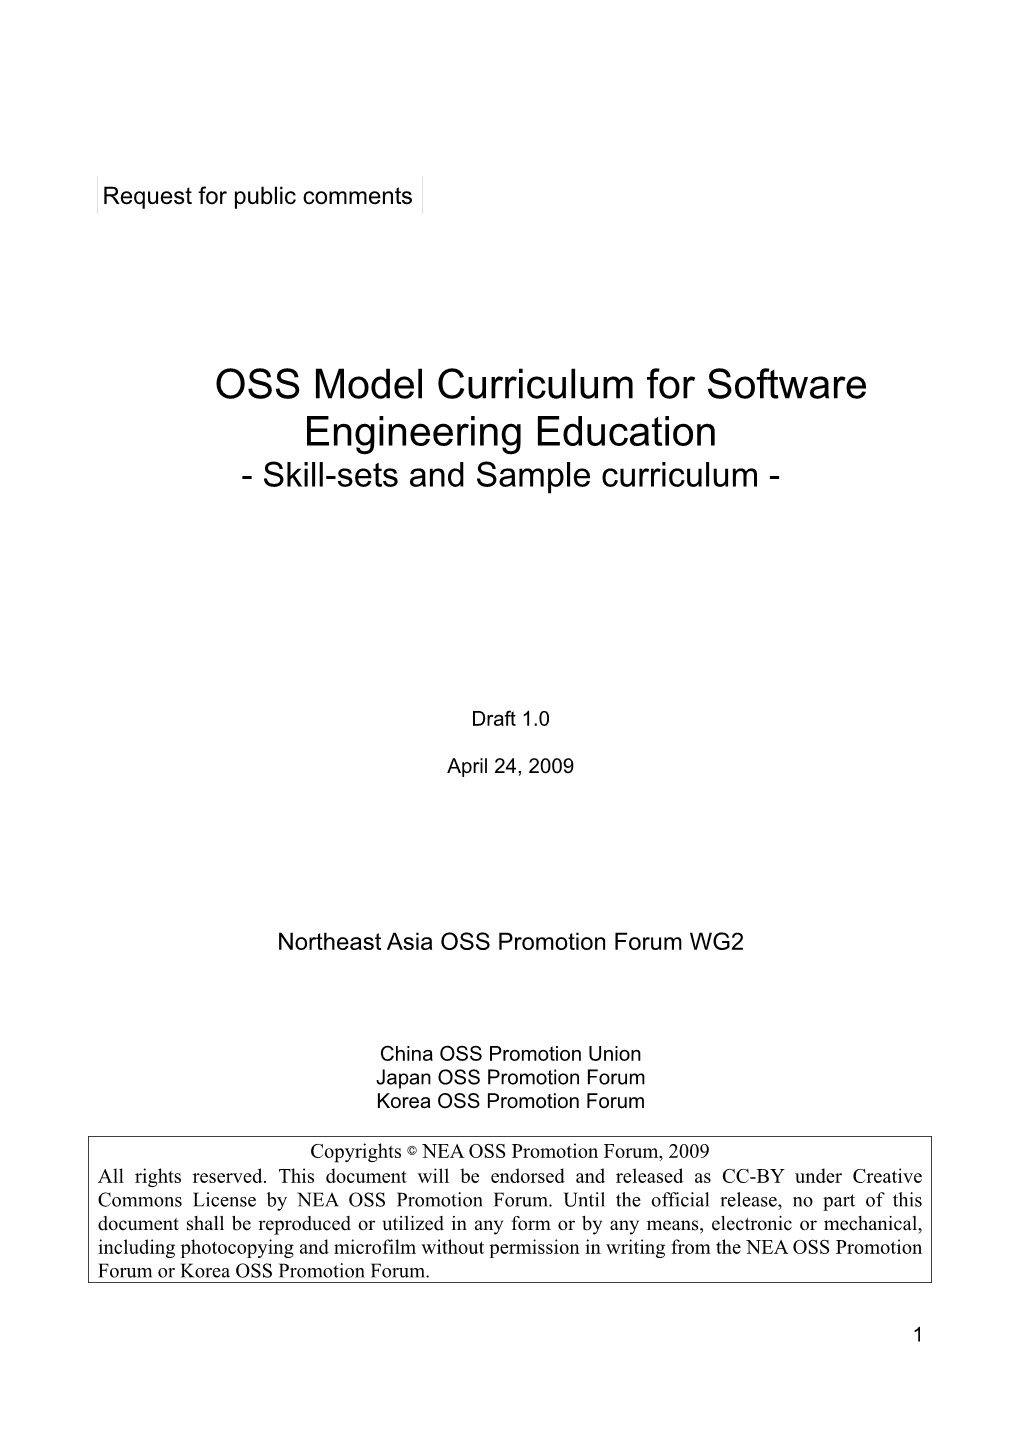 OSS Model Curriculum for Software Engineering Education - Skill-Sets and Sample Curriculum